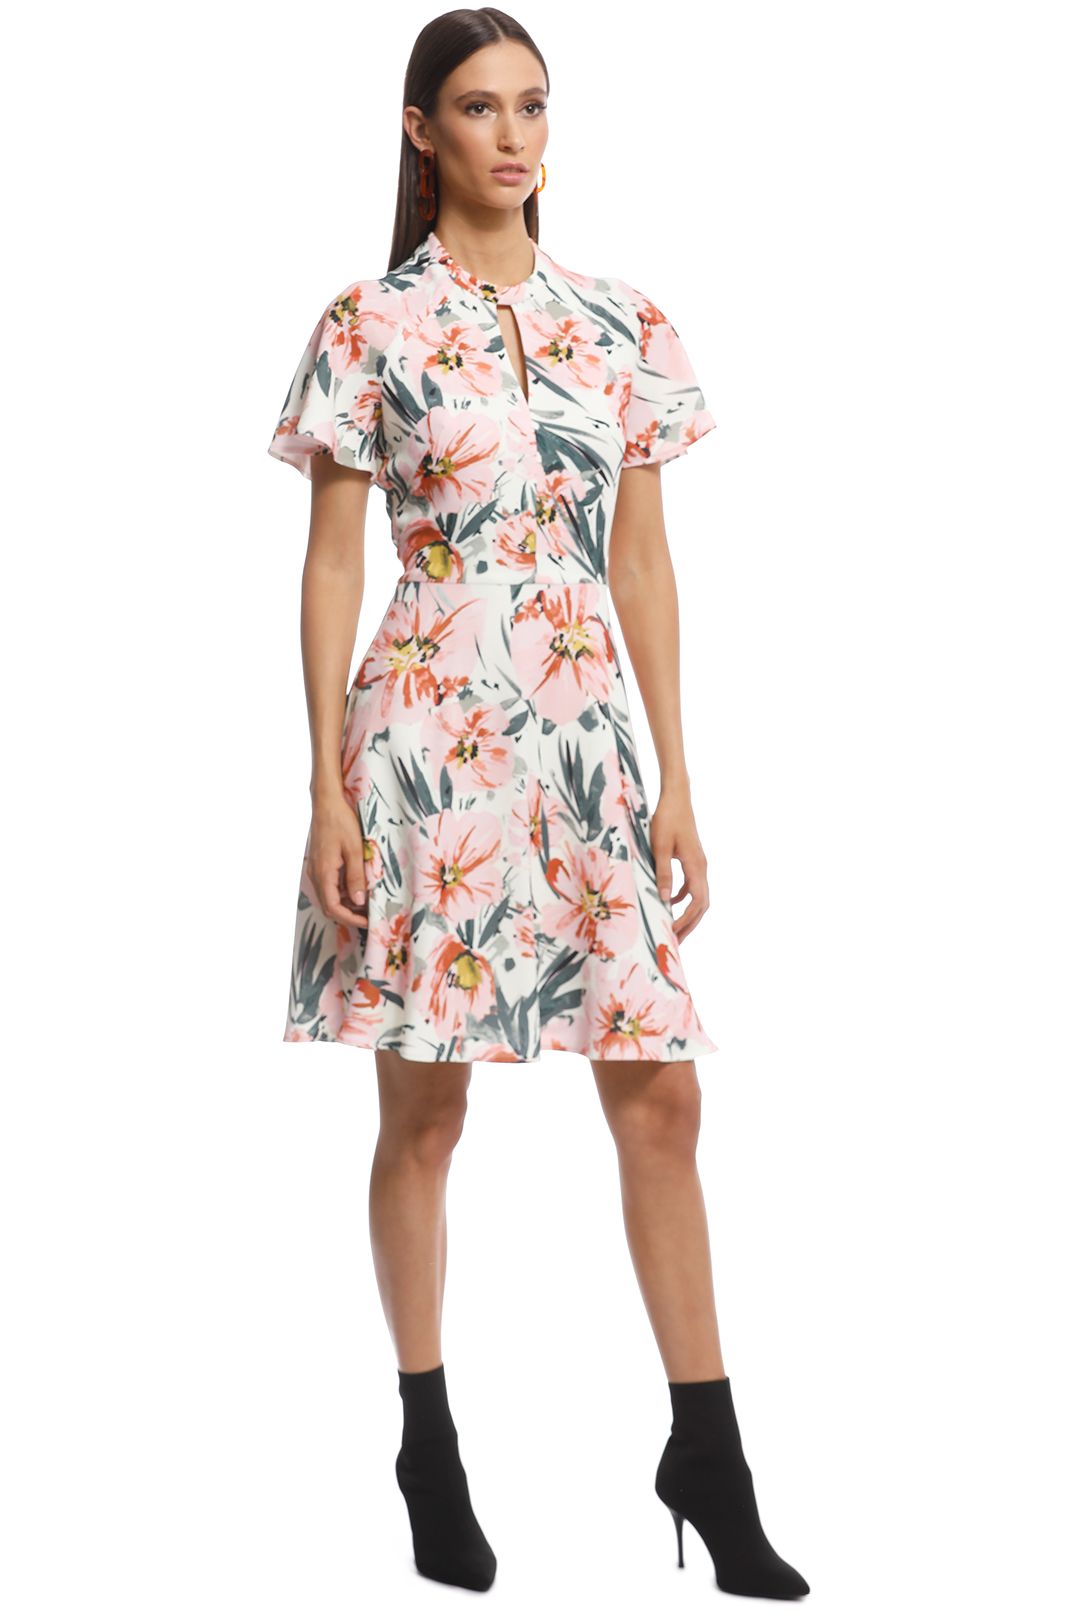 Cue - Painted Floral Tucked Sleeve Dress - Blush - Side